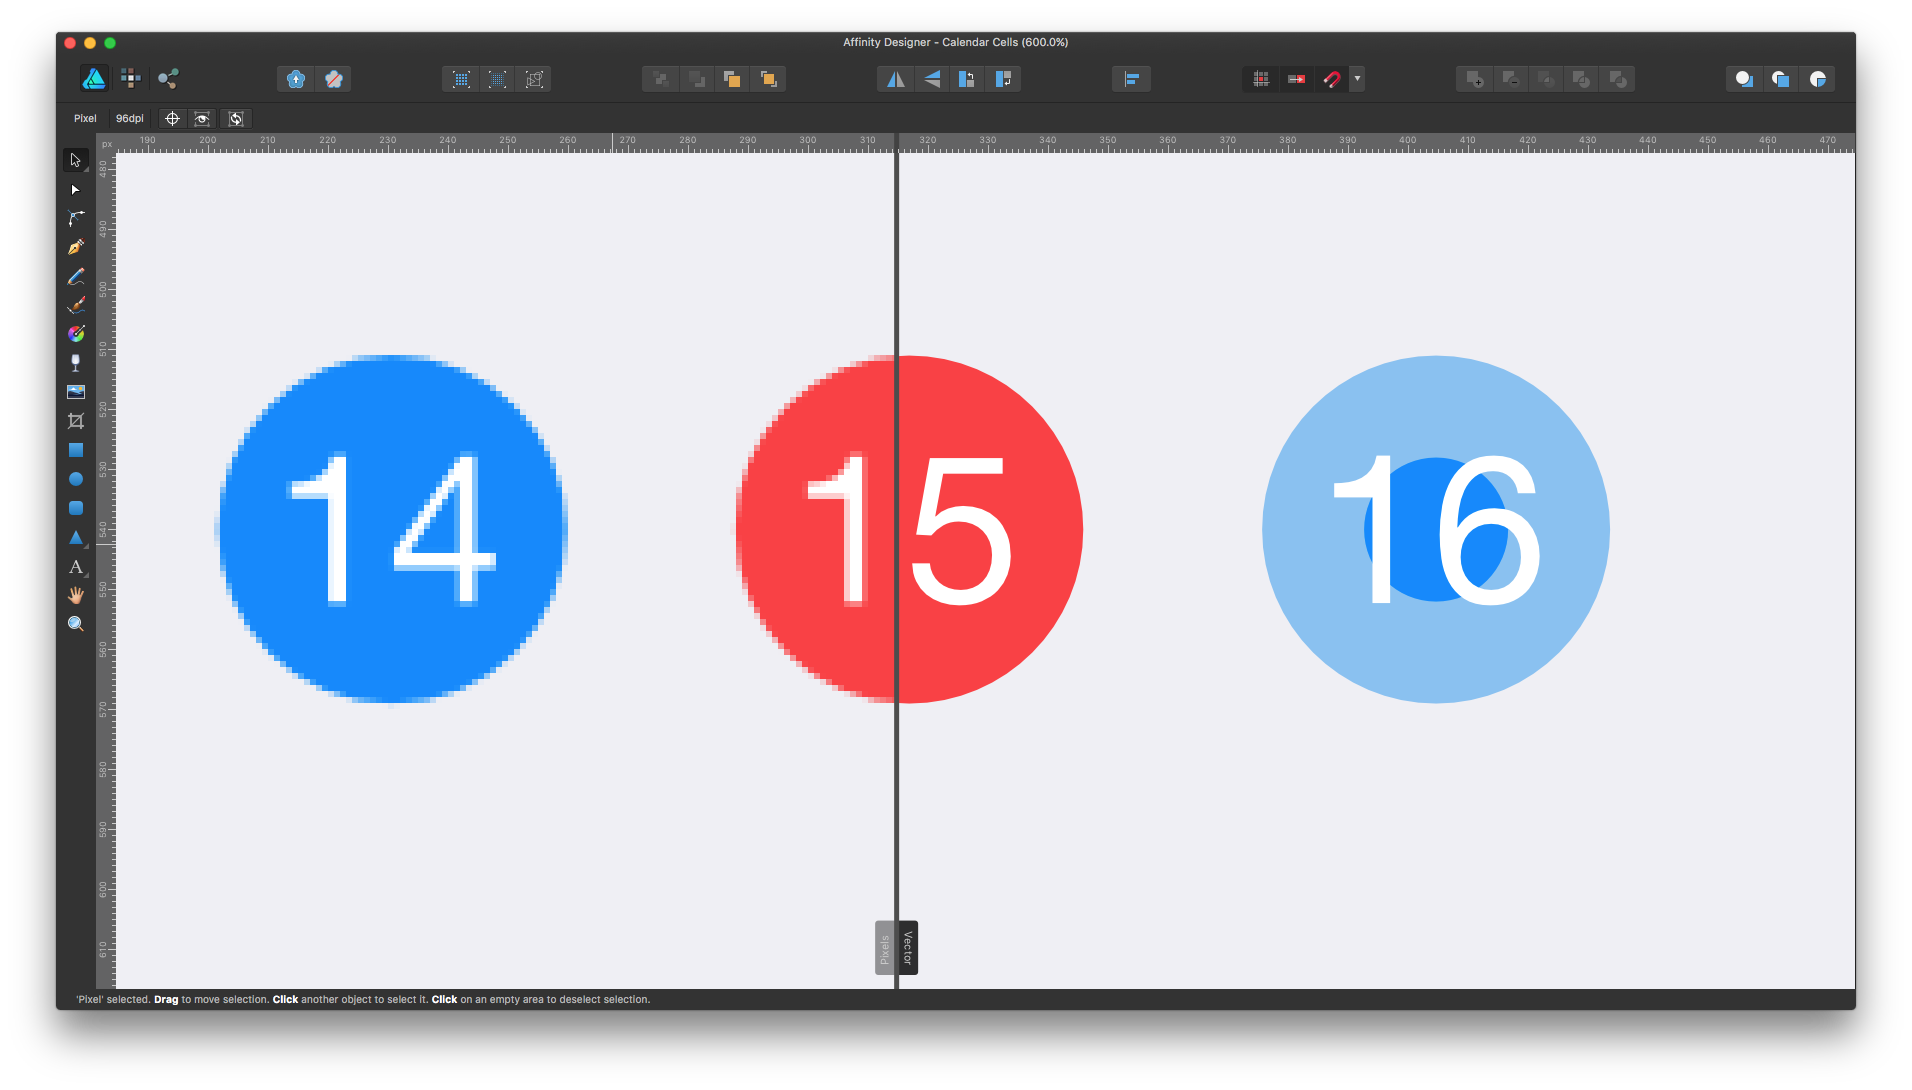 Affinity Designer showing pixel and vector modes side by side.